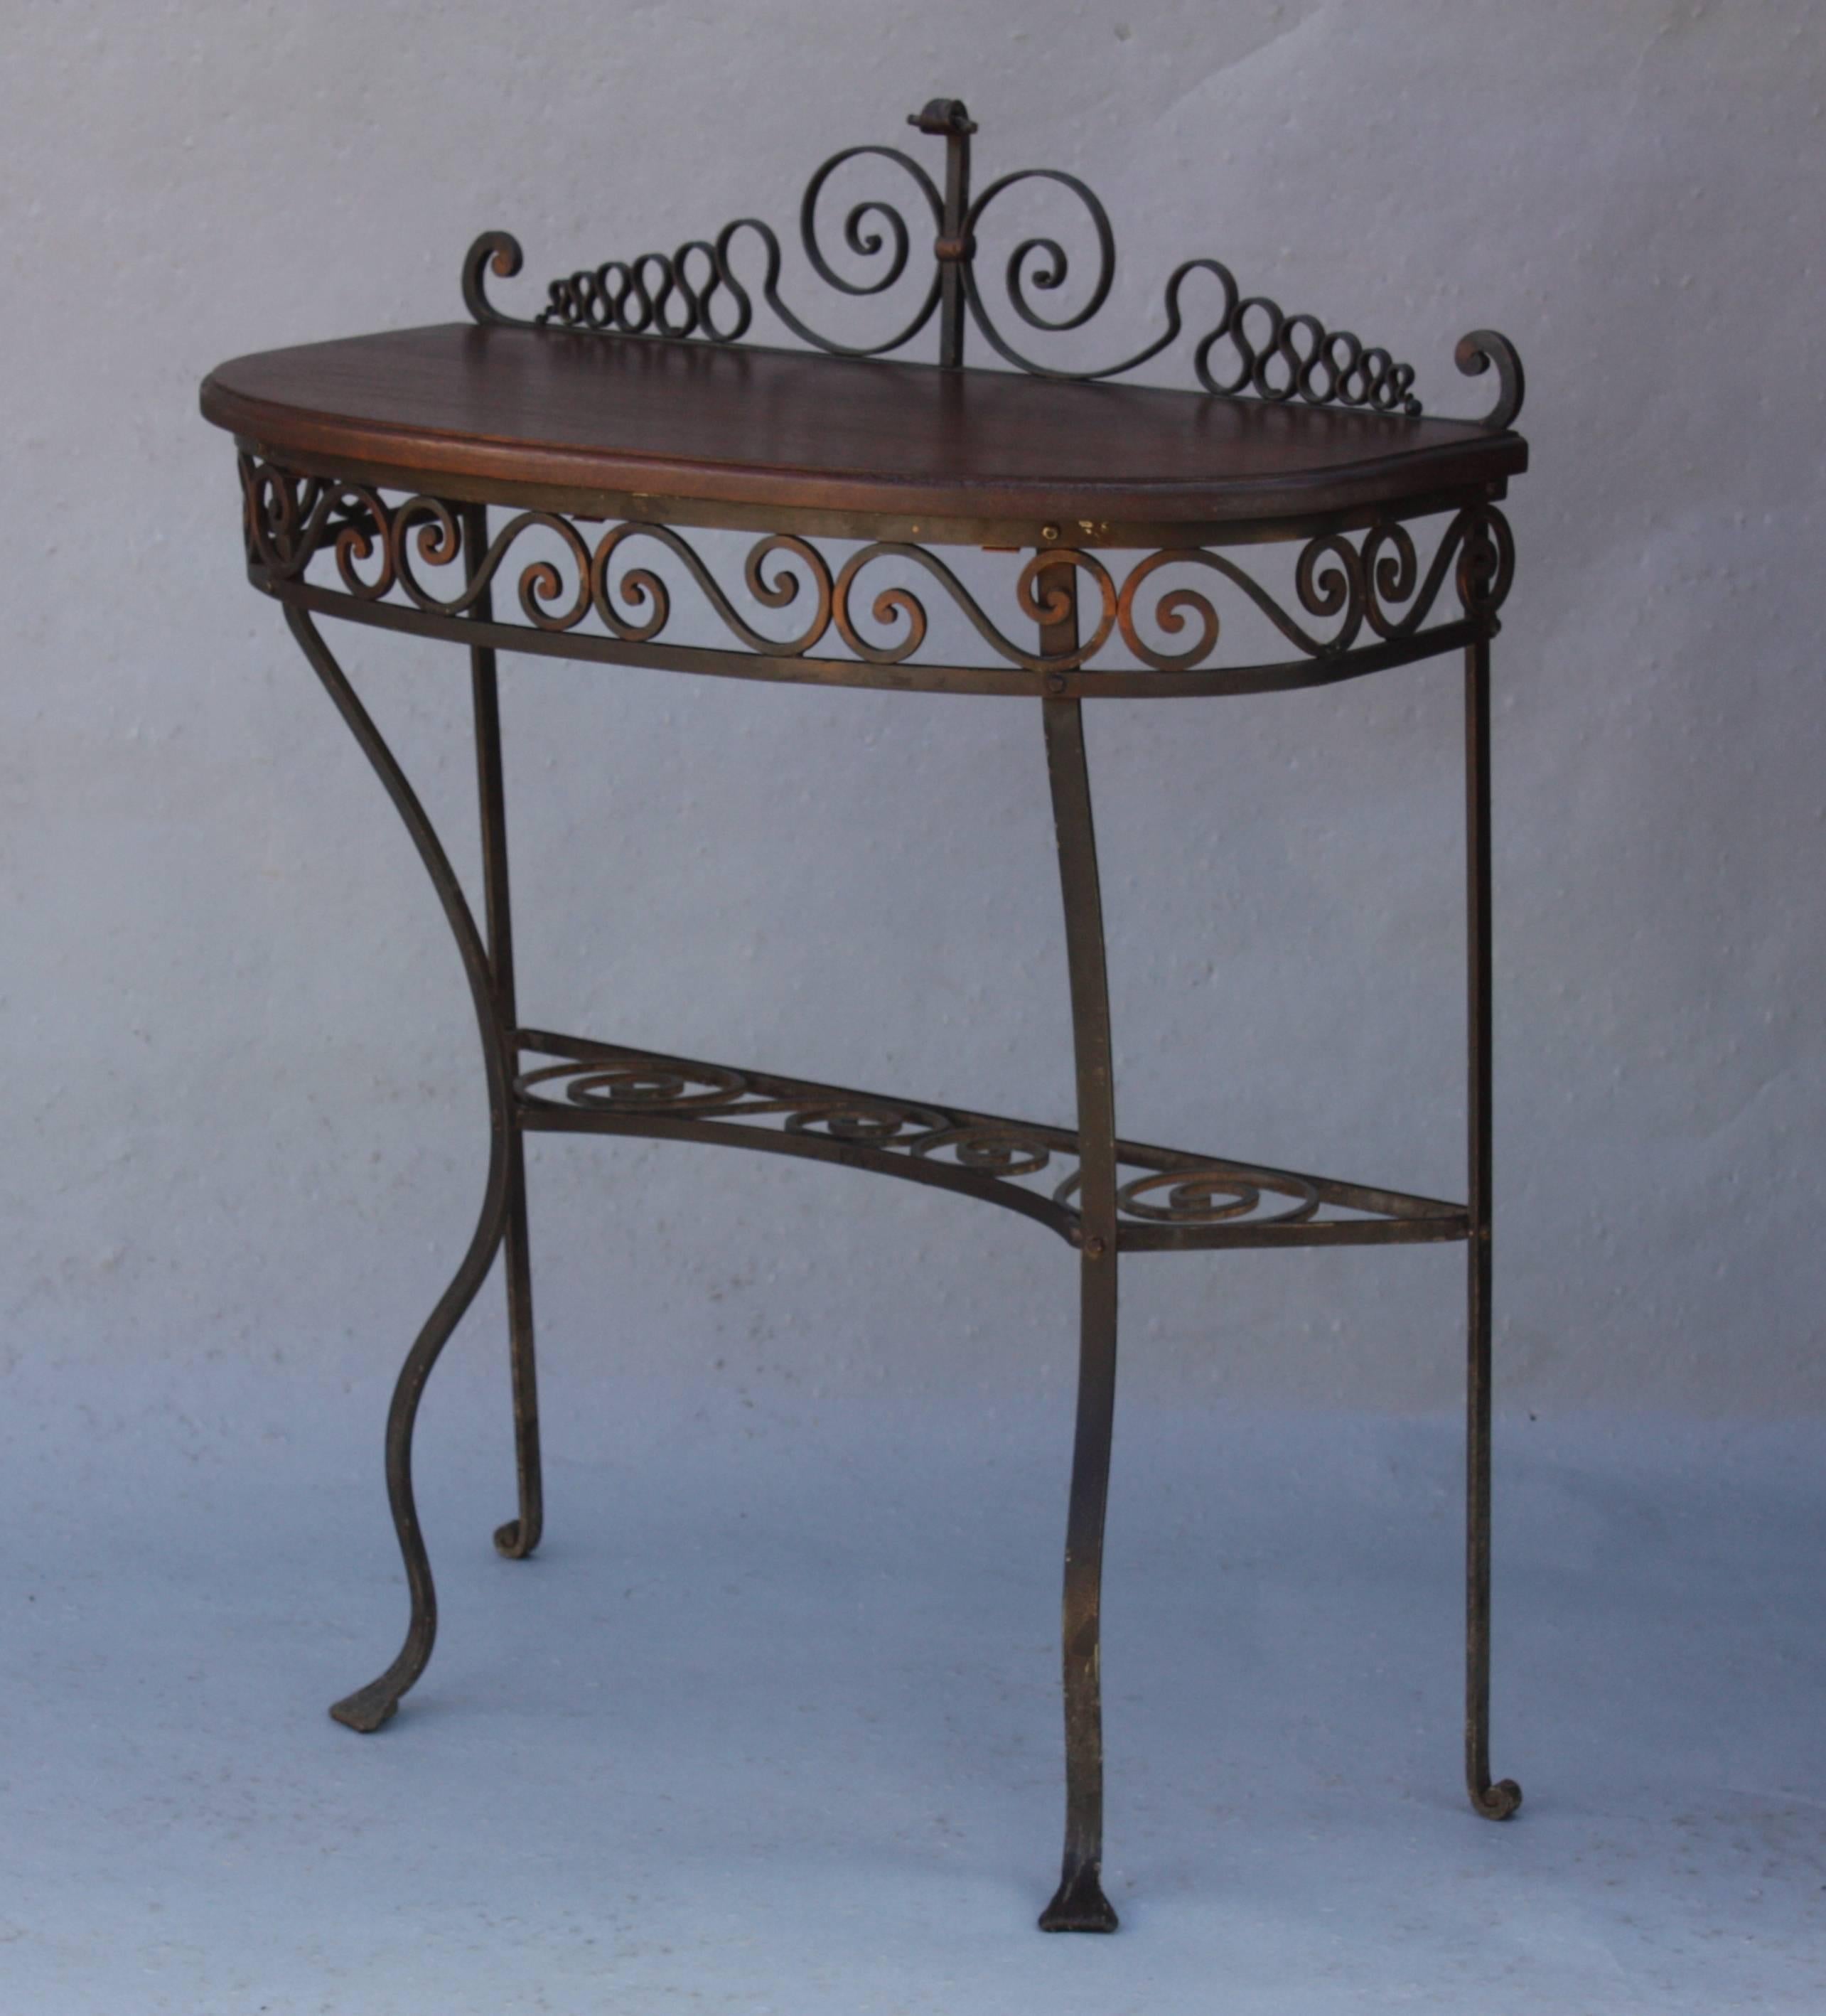 Demilune table with beautiful iron work, circa 1920s. Measures: 36